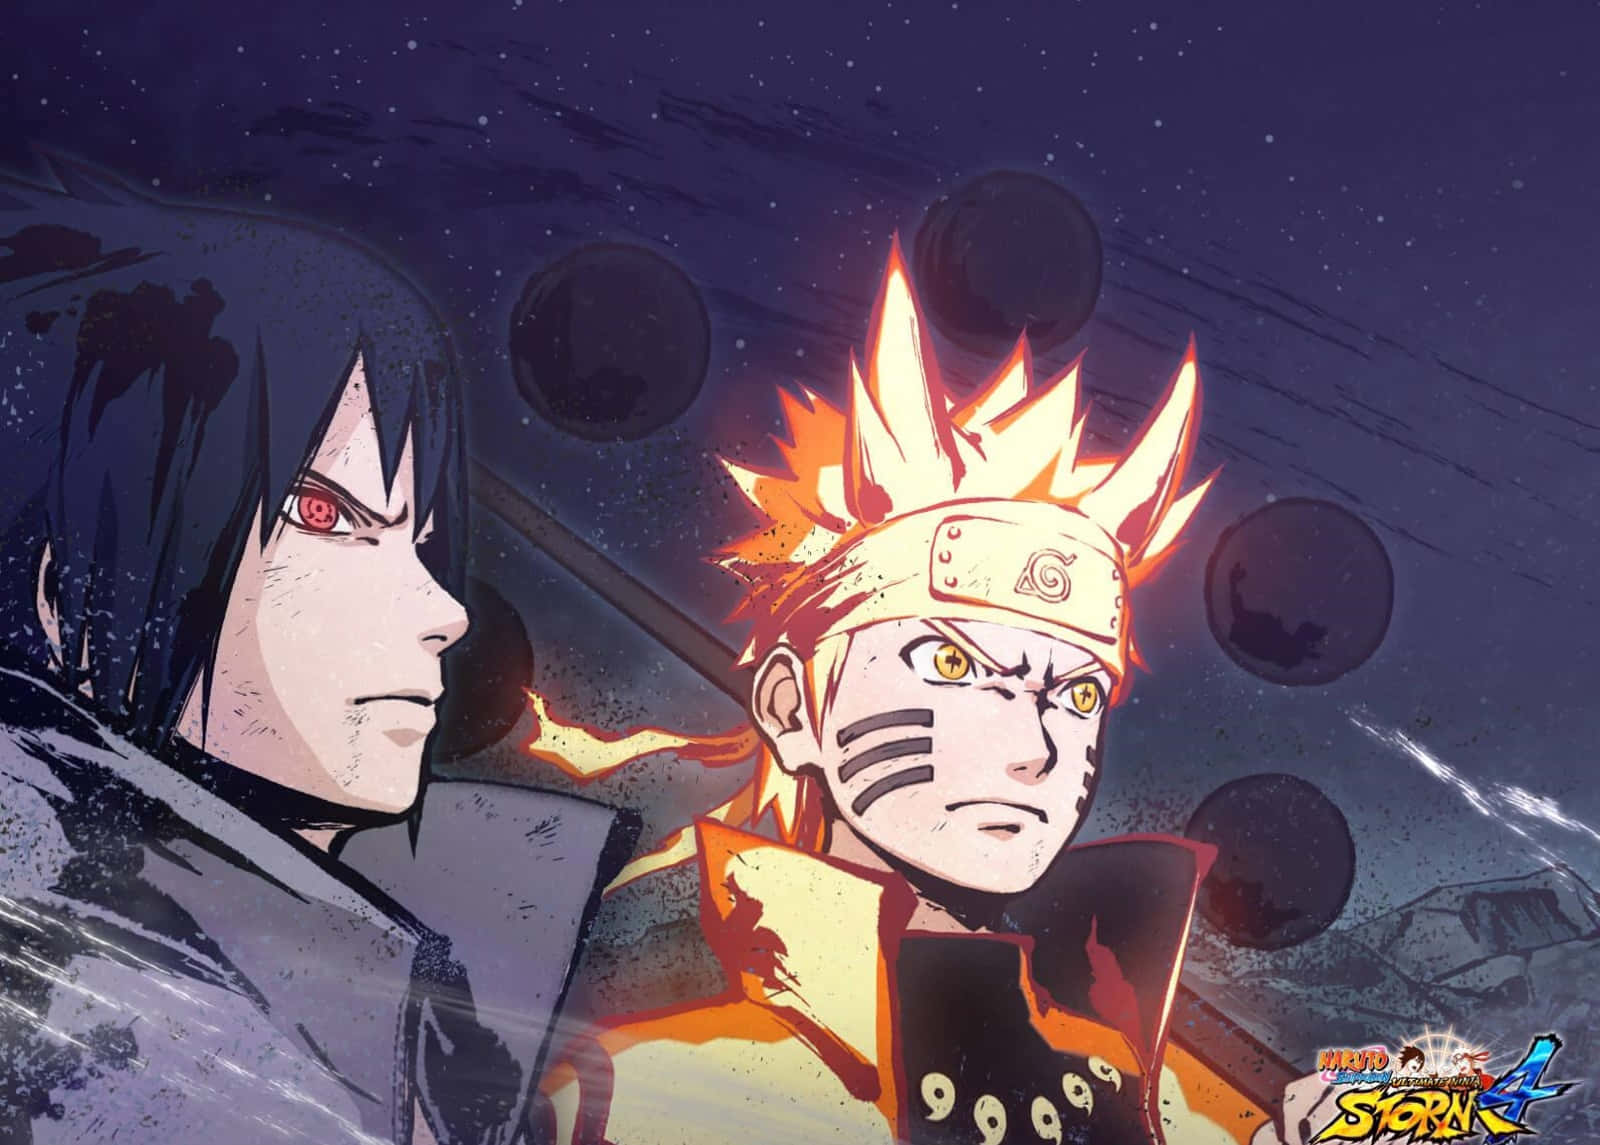 Dive into the world of Naruto with the PS4 Wallpaper